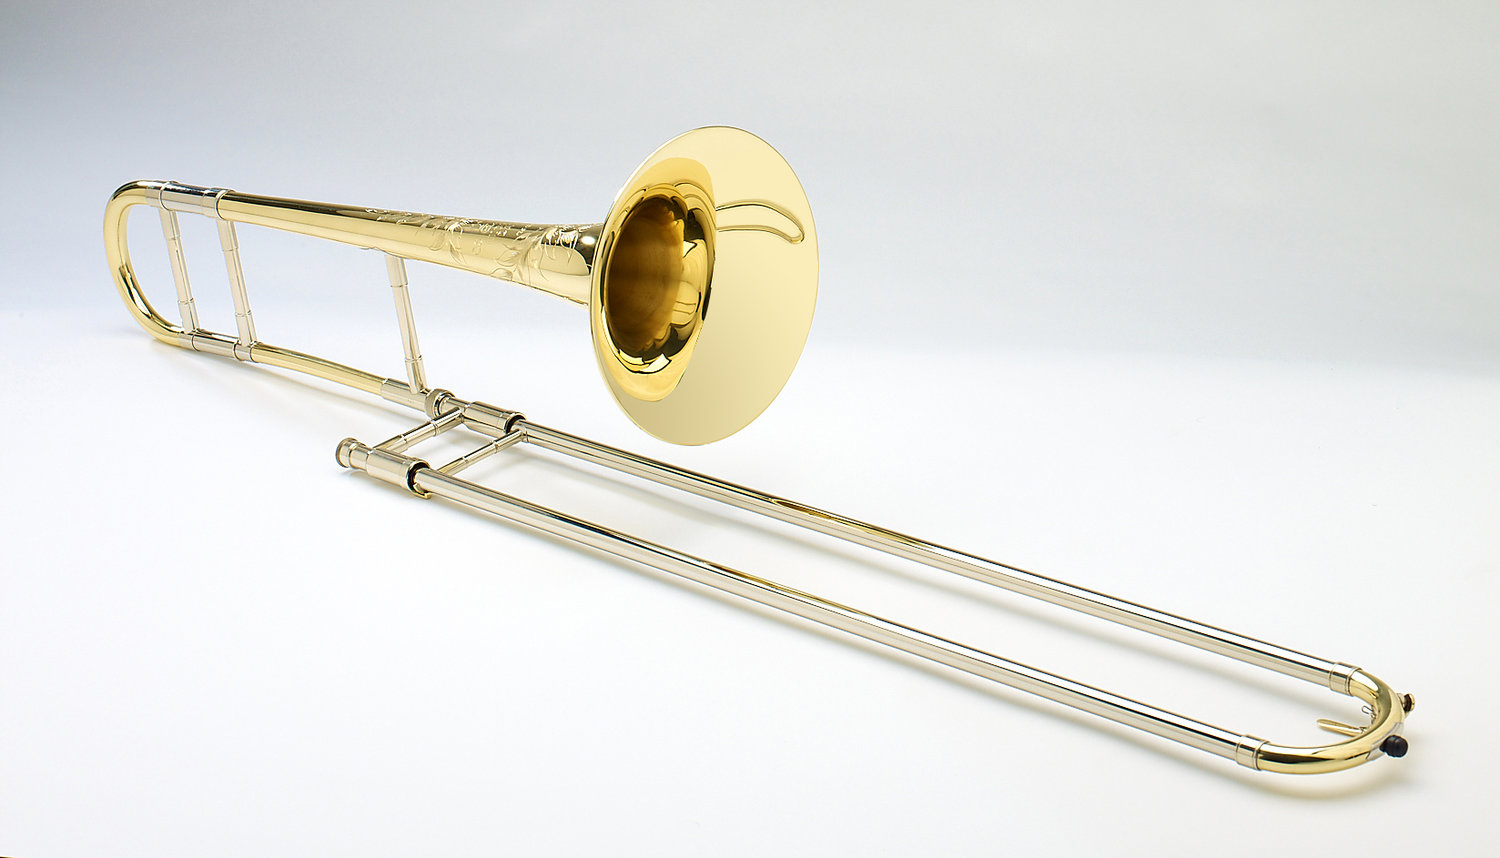 Detail Picture Of A Trombone Nomer 39